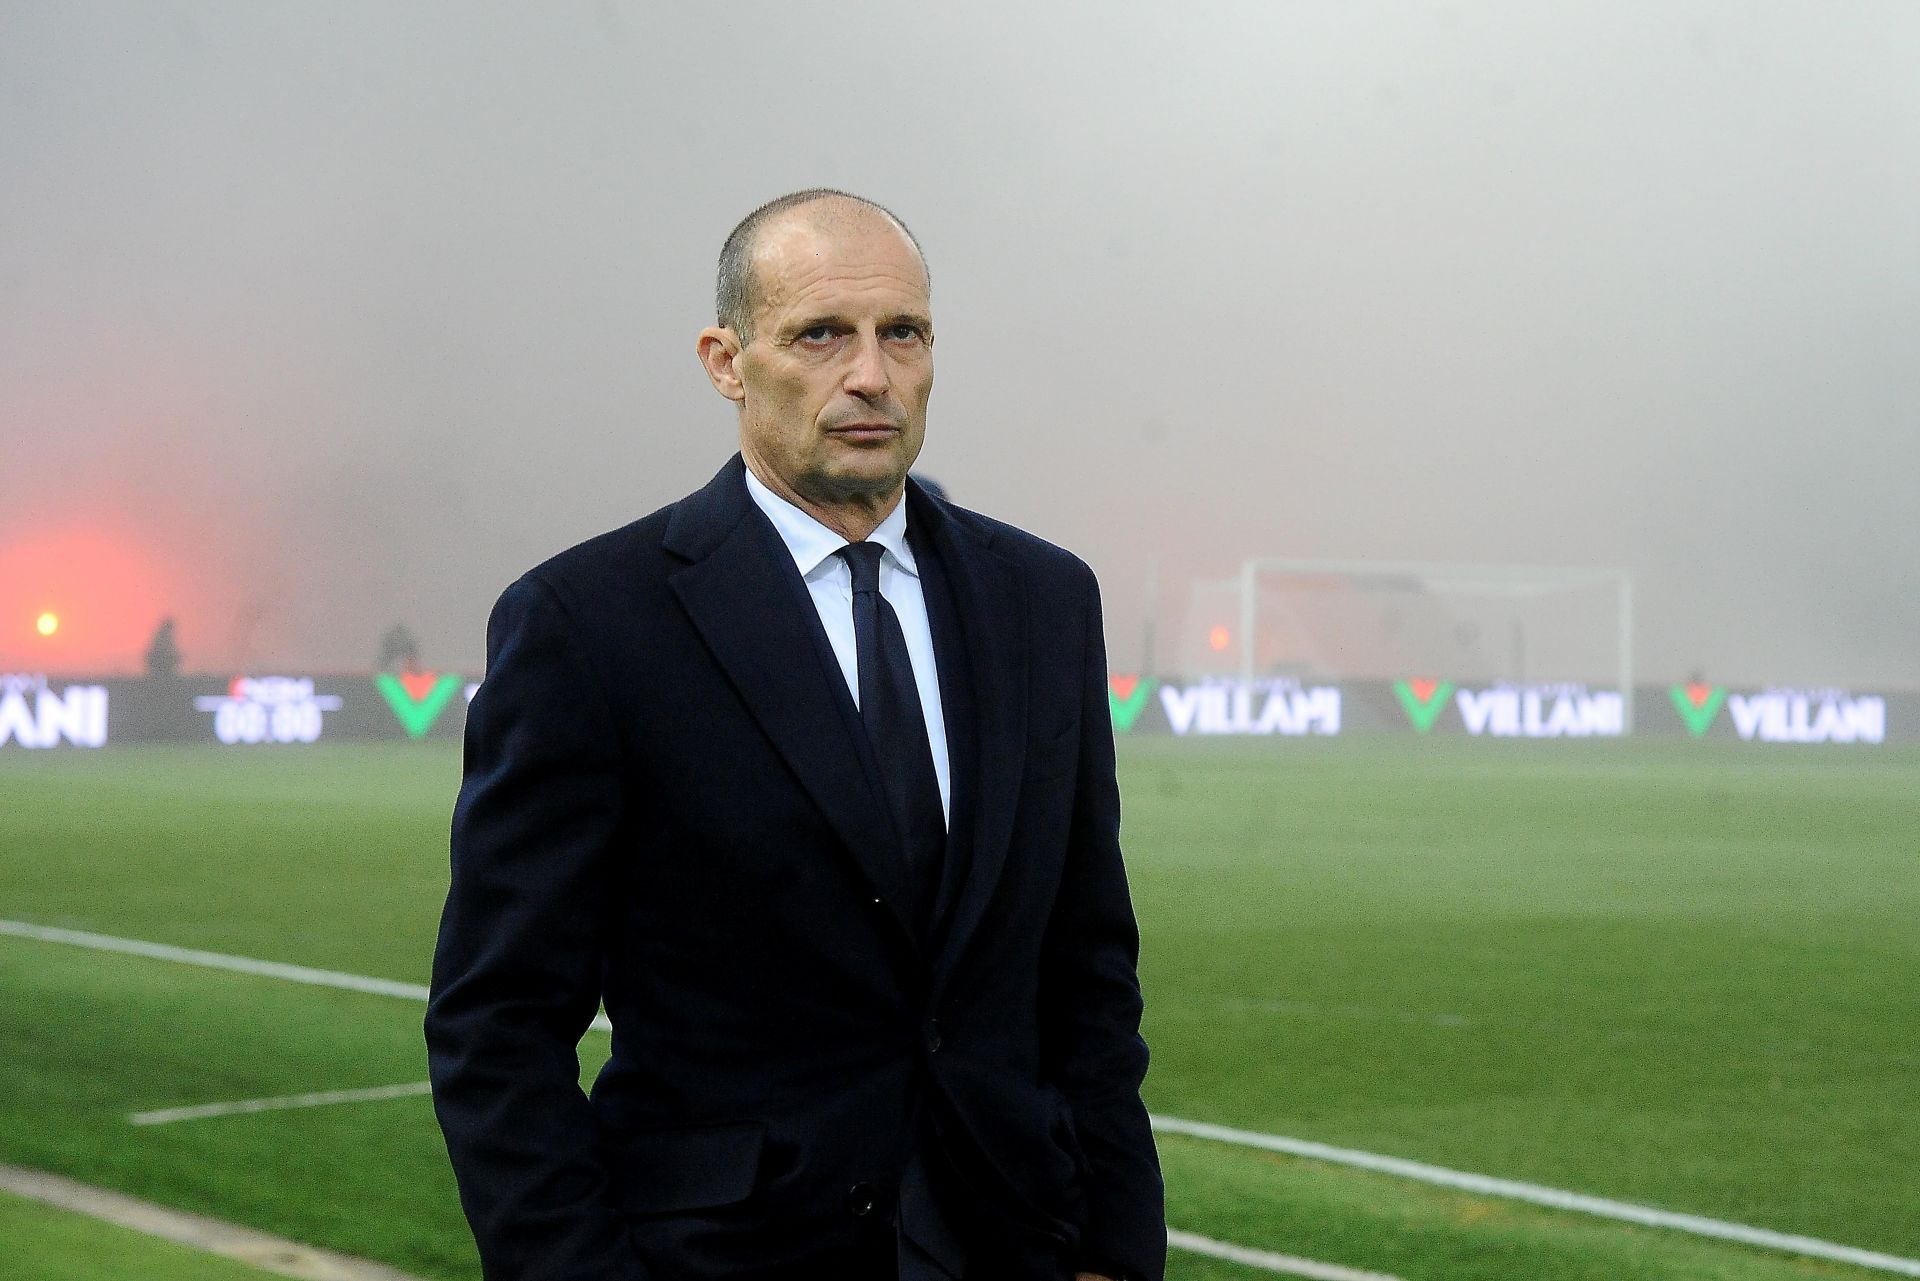 Massimiliano Allegri took charge at Juventus last summer for his second stint in Turin.